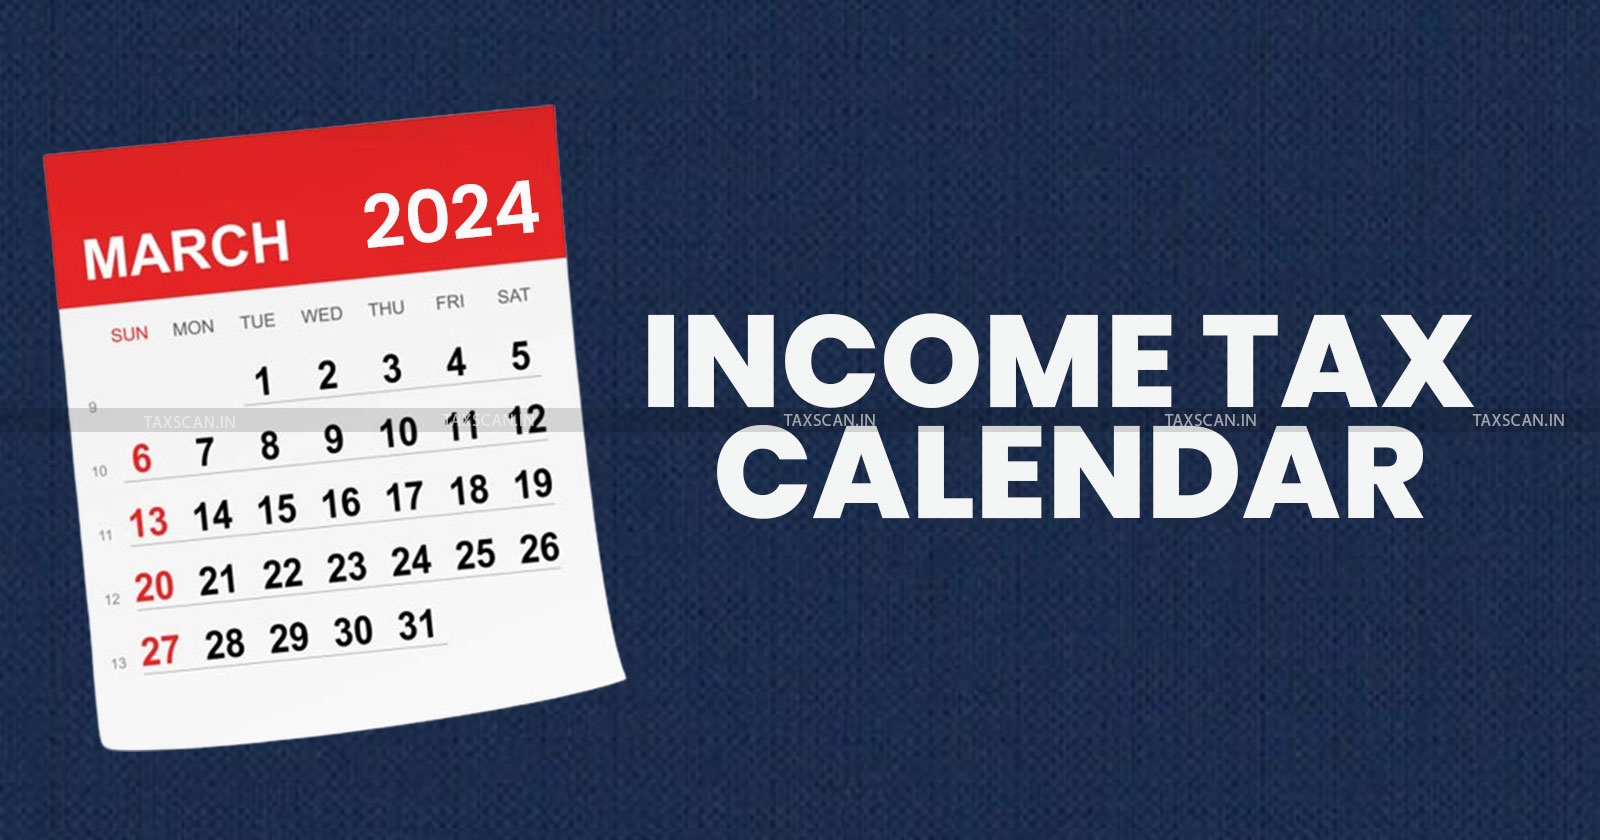 Remember - Due Dates - Income Tax Compliance Calendar - March 2024 - taxscan